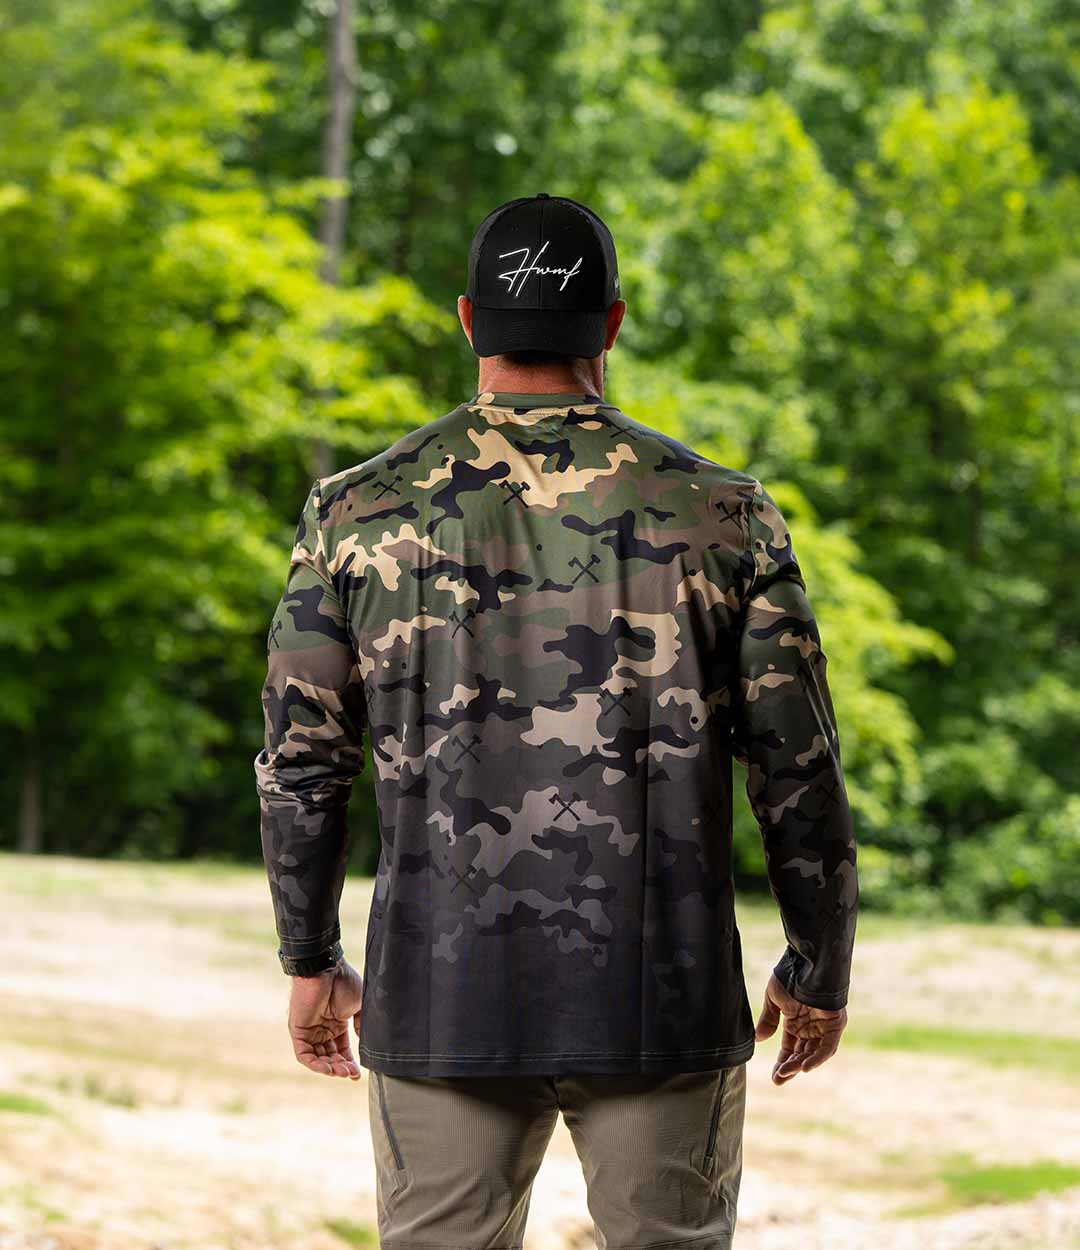 Camouflage T-Shirt Military Army Combat T Shirt Men Long Sleeve US